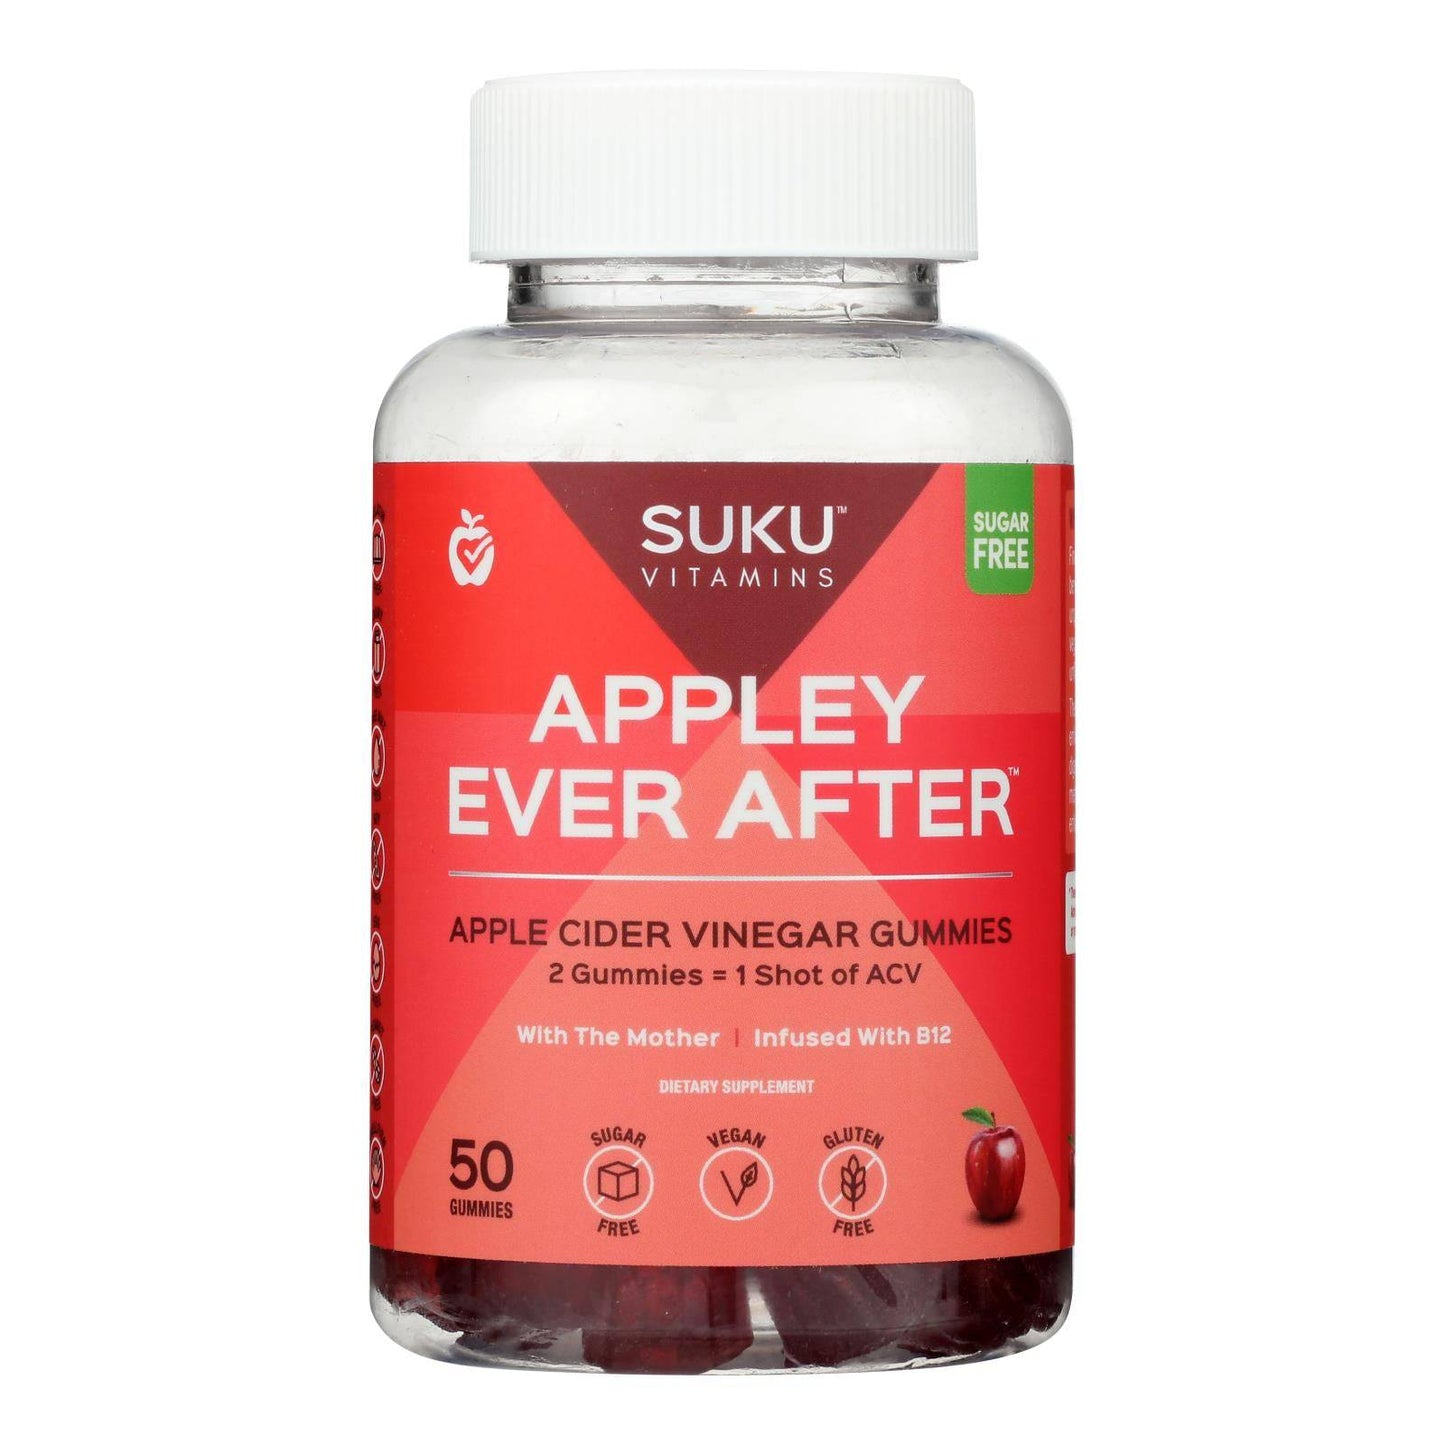 Suku Vitamins - Gummy Appley Ever After - 1 Each -50 Count | OnlyNaturals.us